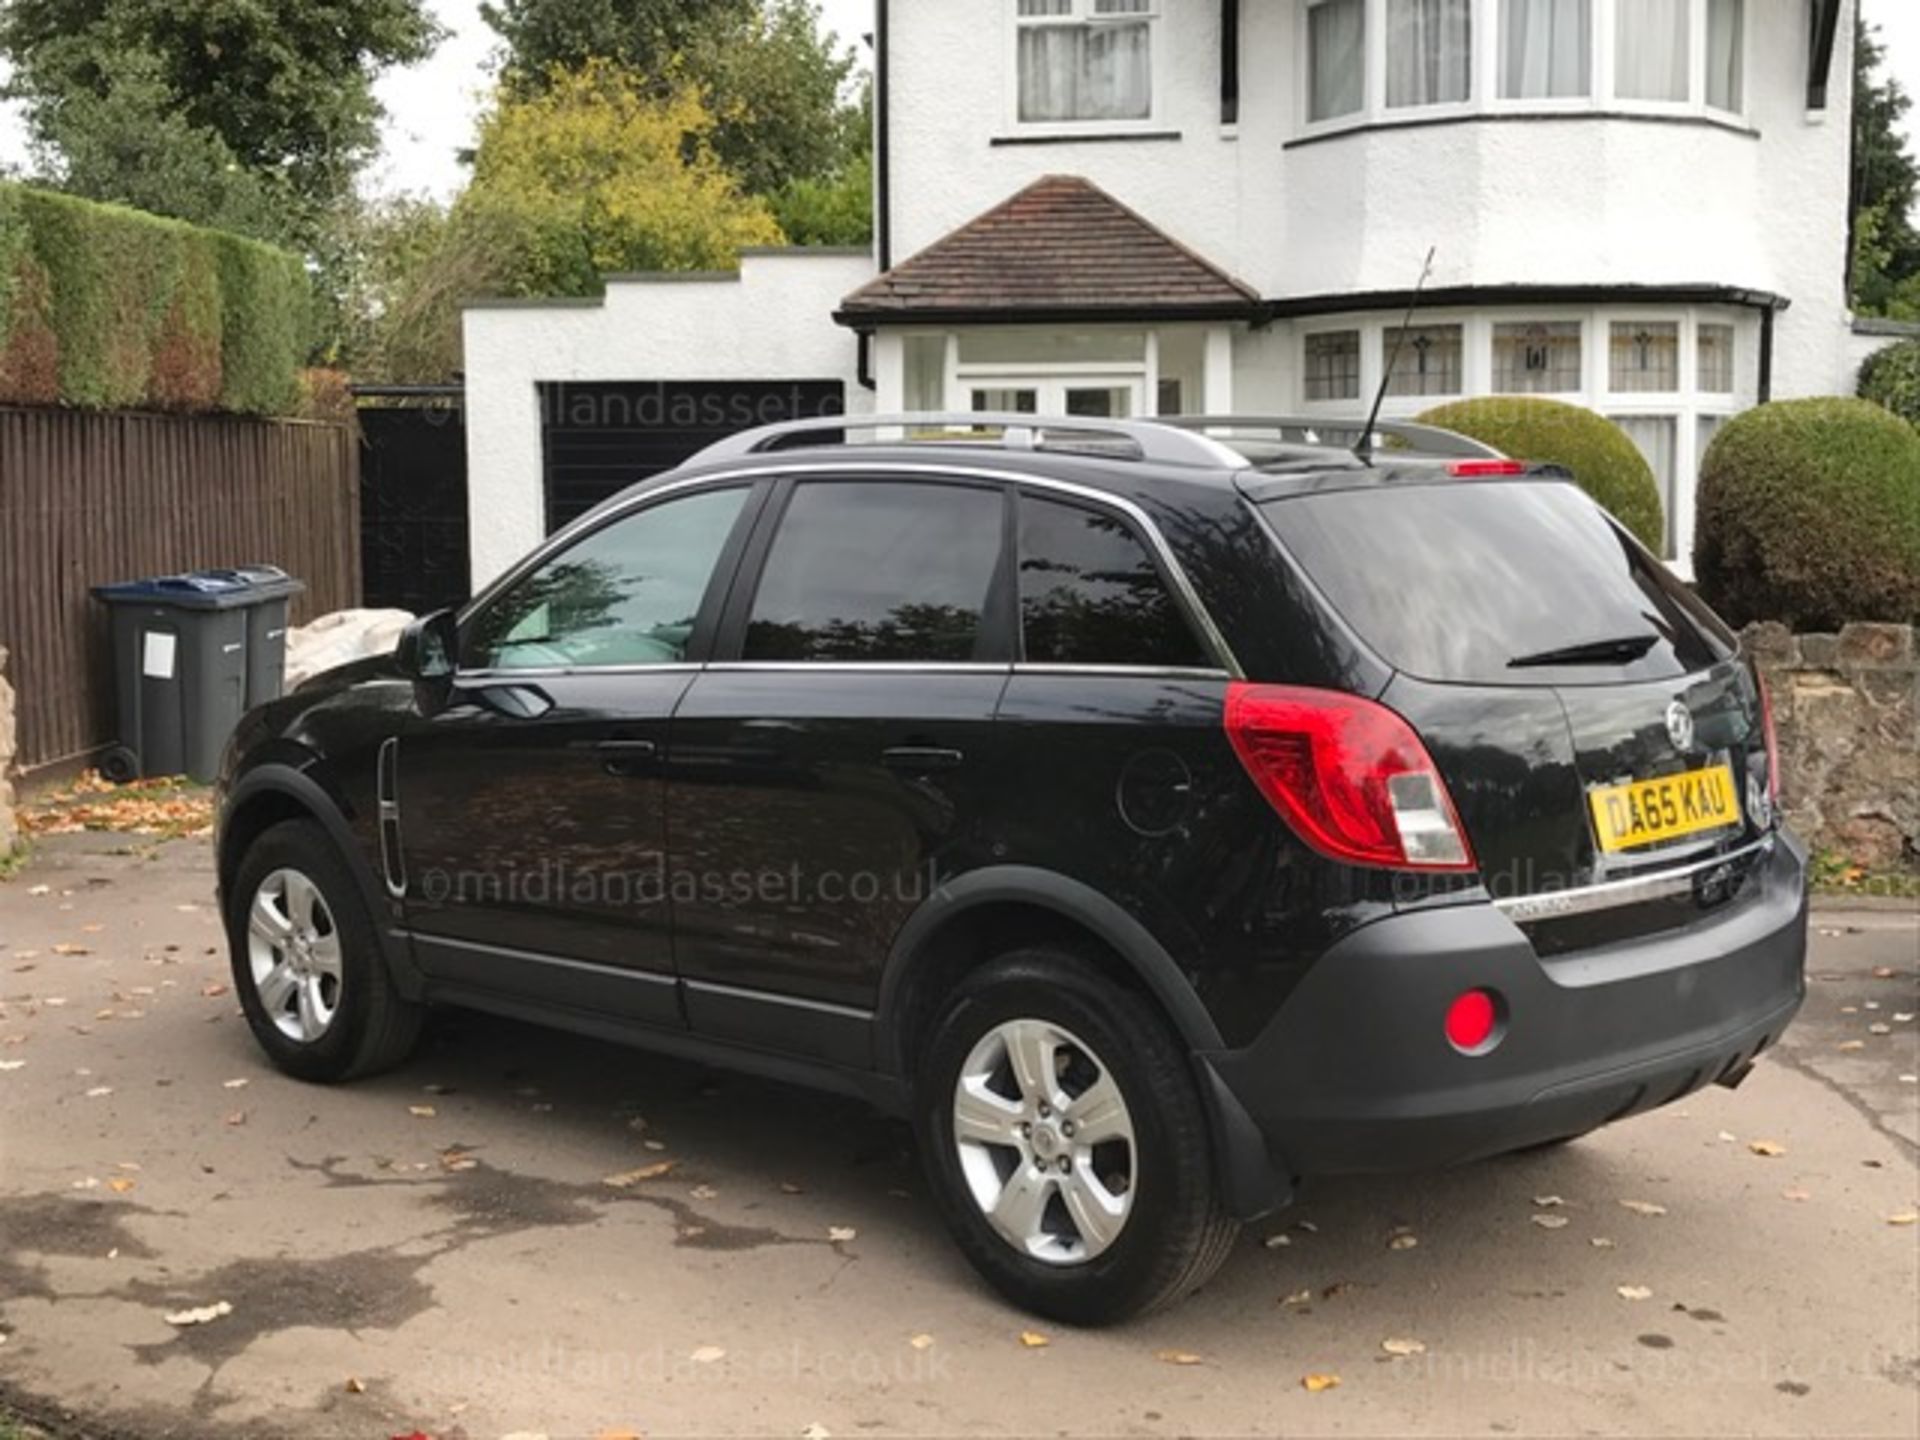 2015/15 REG VAUXHALL ANTARA EXCLUSIVE 2.2 CDTI ONE FORMER KEEPER FULL SERVICE HISTORY - Image 7 of 9